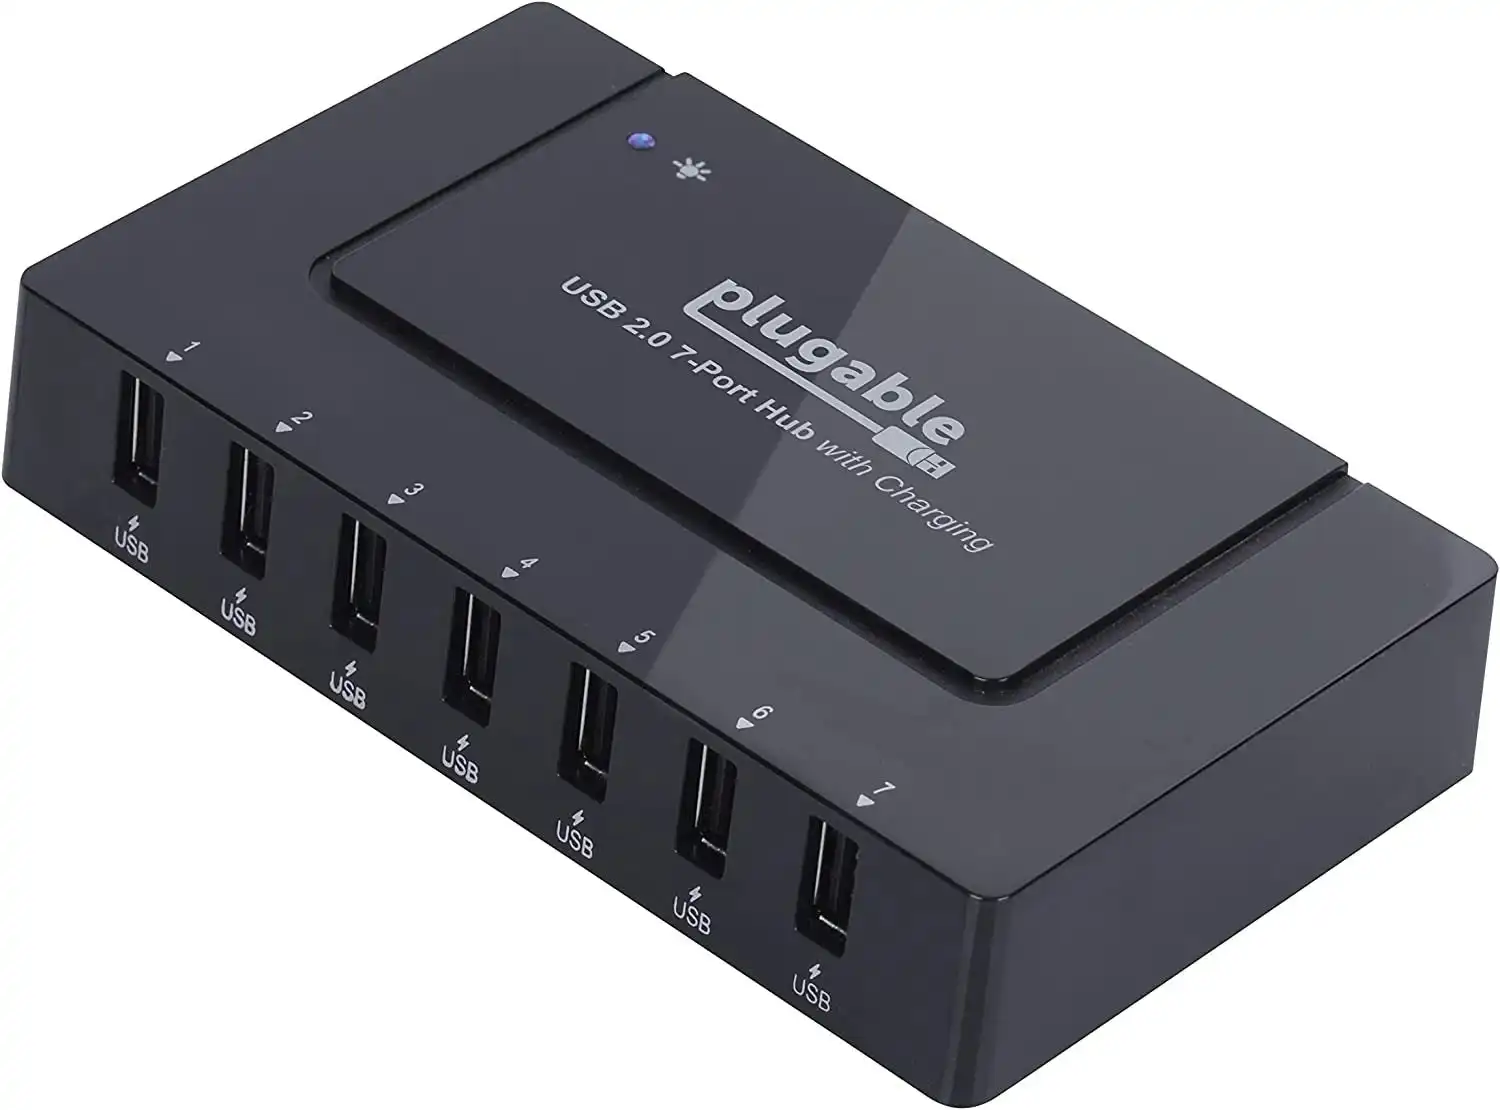 7 Port USB Hub - Plugable USB Charging Station for Multiple Devices and USB 2.0 Data Transfer with a 60W Power Adapter